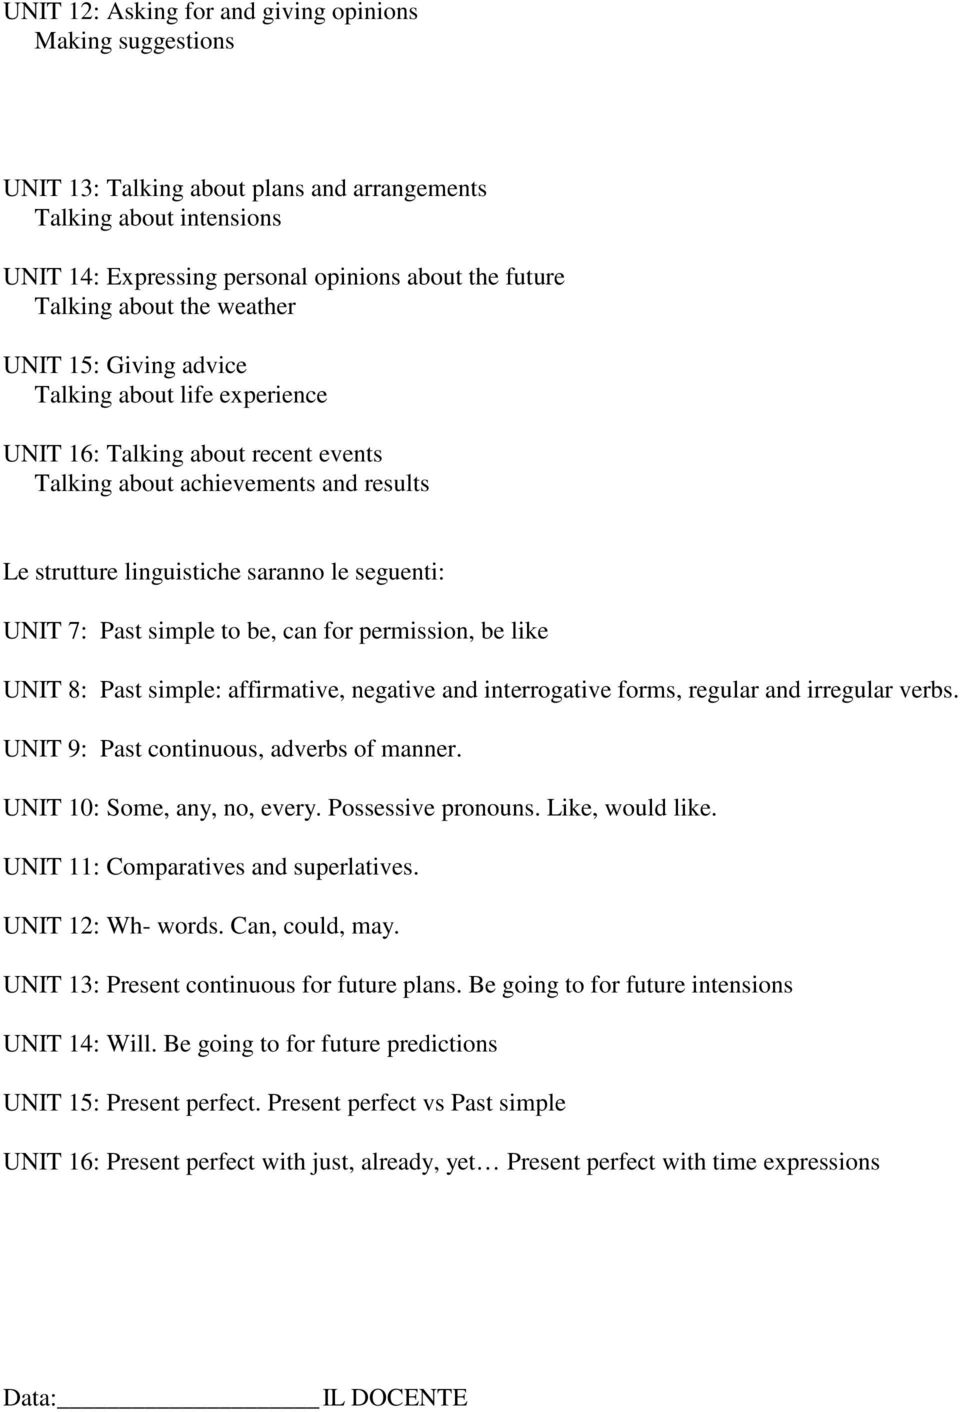 Past simple to be, can for permission, be like UNIT 8: Past simple: affirmative, negative and interrogative forms, regular and irregular verbs. UNIT 9: Past continuous, adverbs of manner.